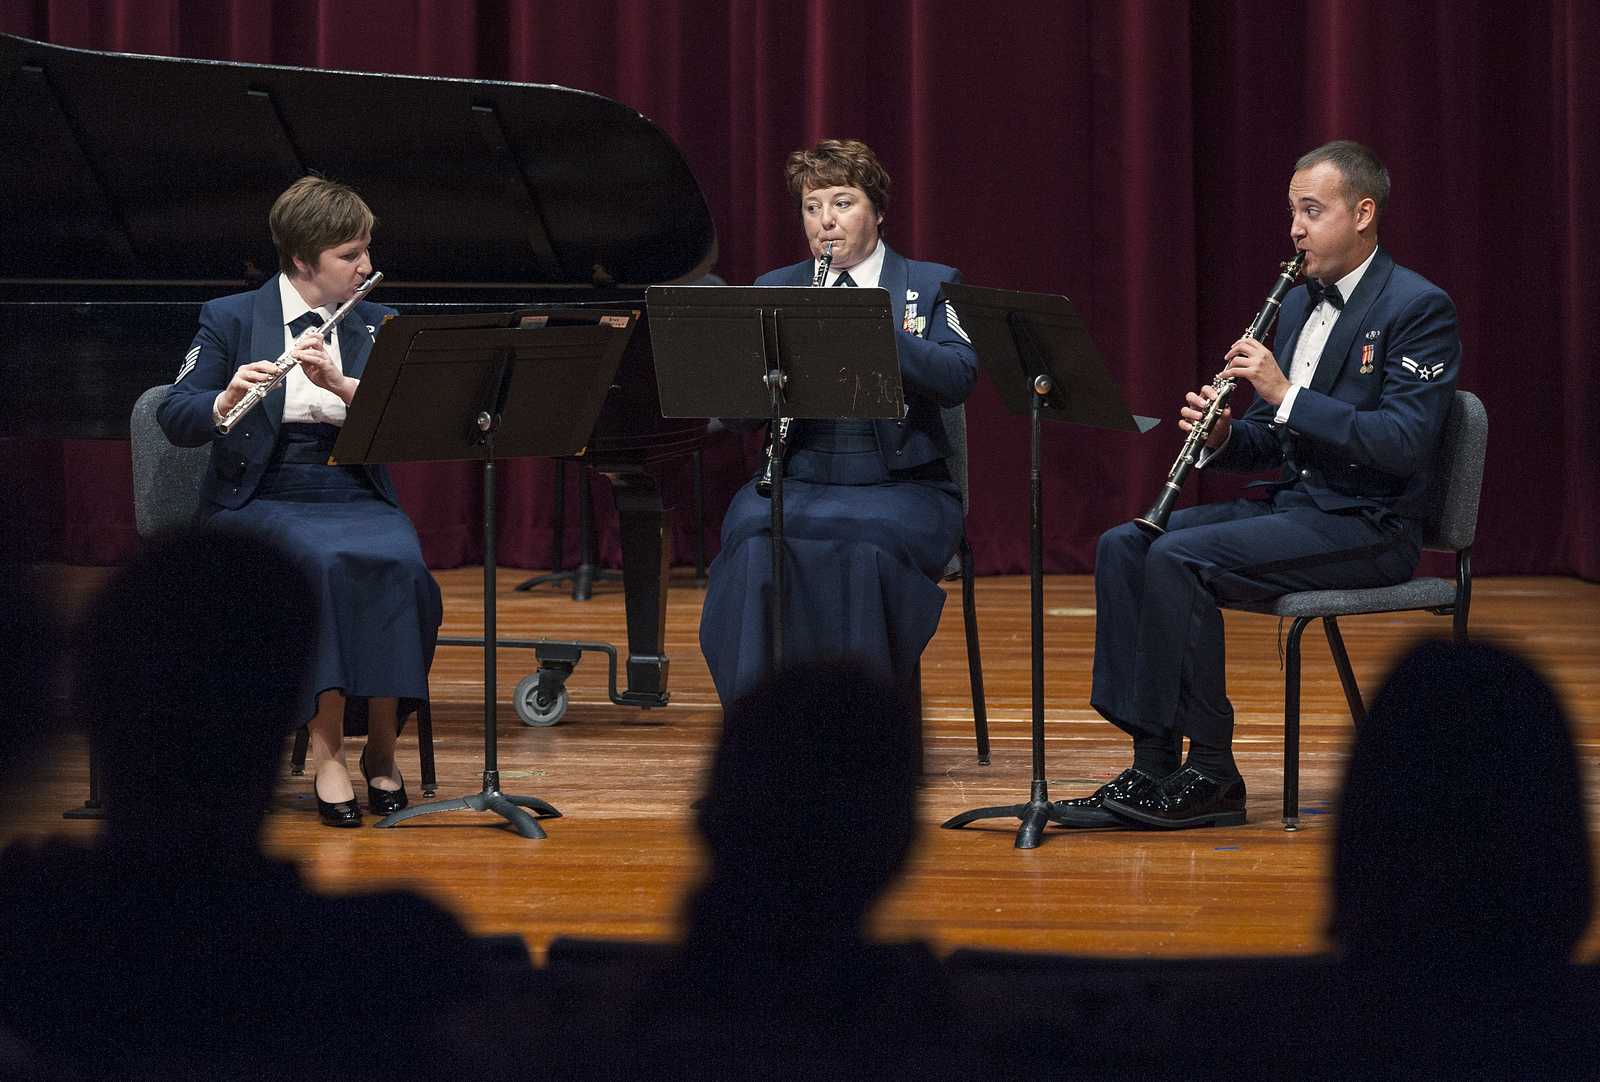 Technical Sergeant Elizabeth Honaker (Flute), Master Sergeant Coreen Levin (Oboe) and Airman First Class Brian Wilmer (Clarinet) play Divertimento for Flute, Oboe and Clarinet, Op. 37 by Sir Malcolm Arnold at a performance by The United States Air Force Band of the Golden West in Knuth Hall. Friday, September 27, 2013. Photo by Benjamin Kamps / Xpress